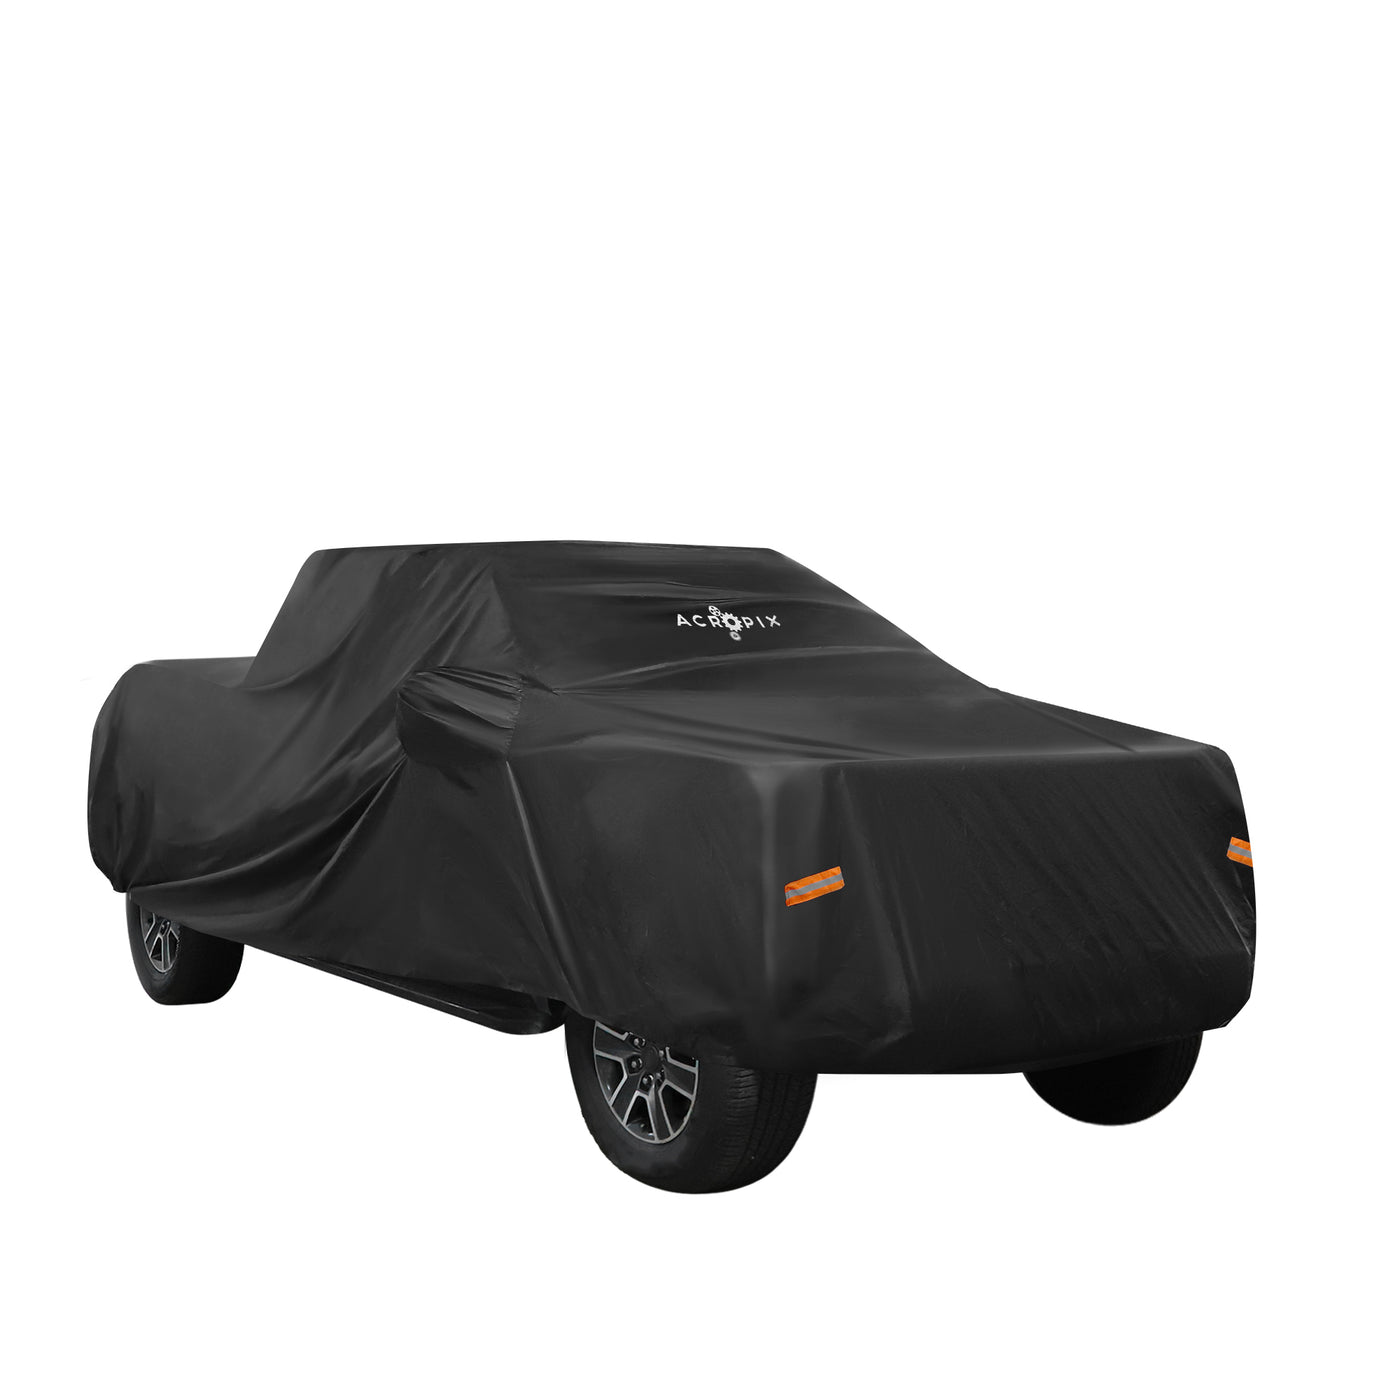 ACROPIX Pickup Truck Car Cover Fit for Ford F150 Crew Cab 6.5ft Bed Pickup 4 Door - Pack of 1 Black